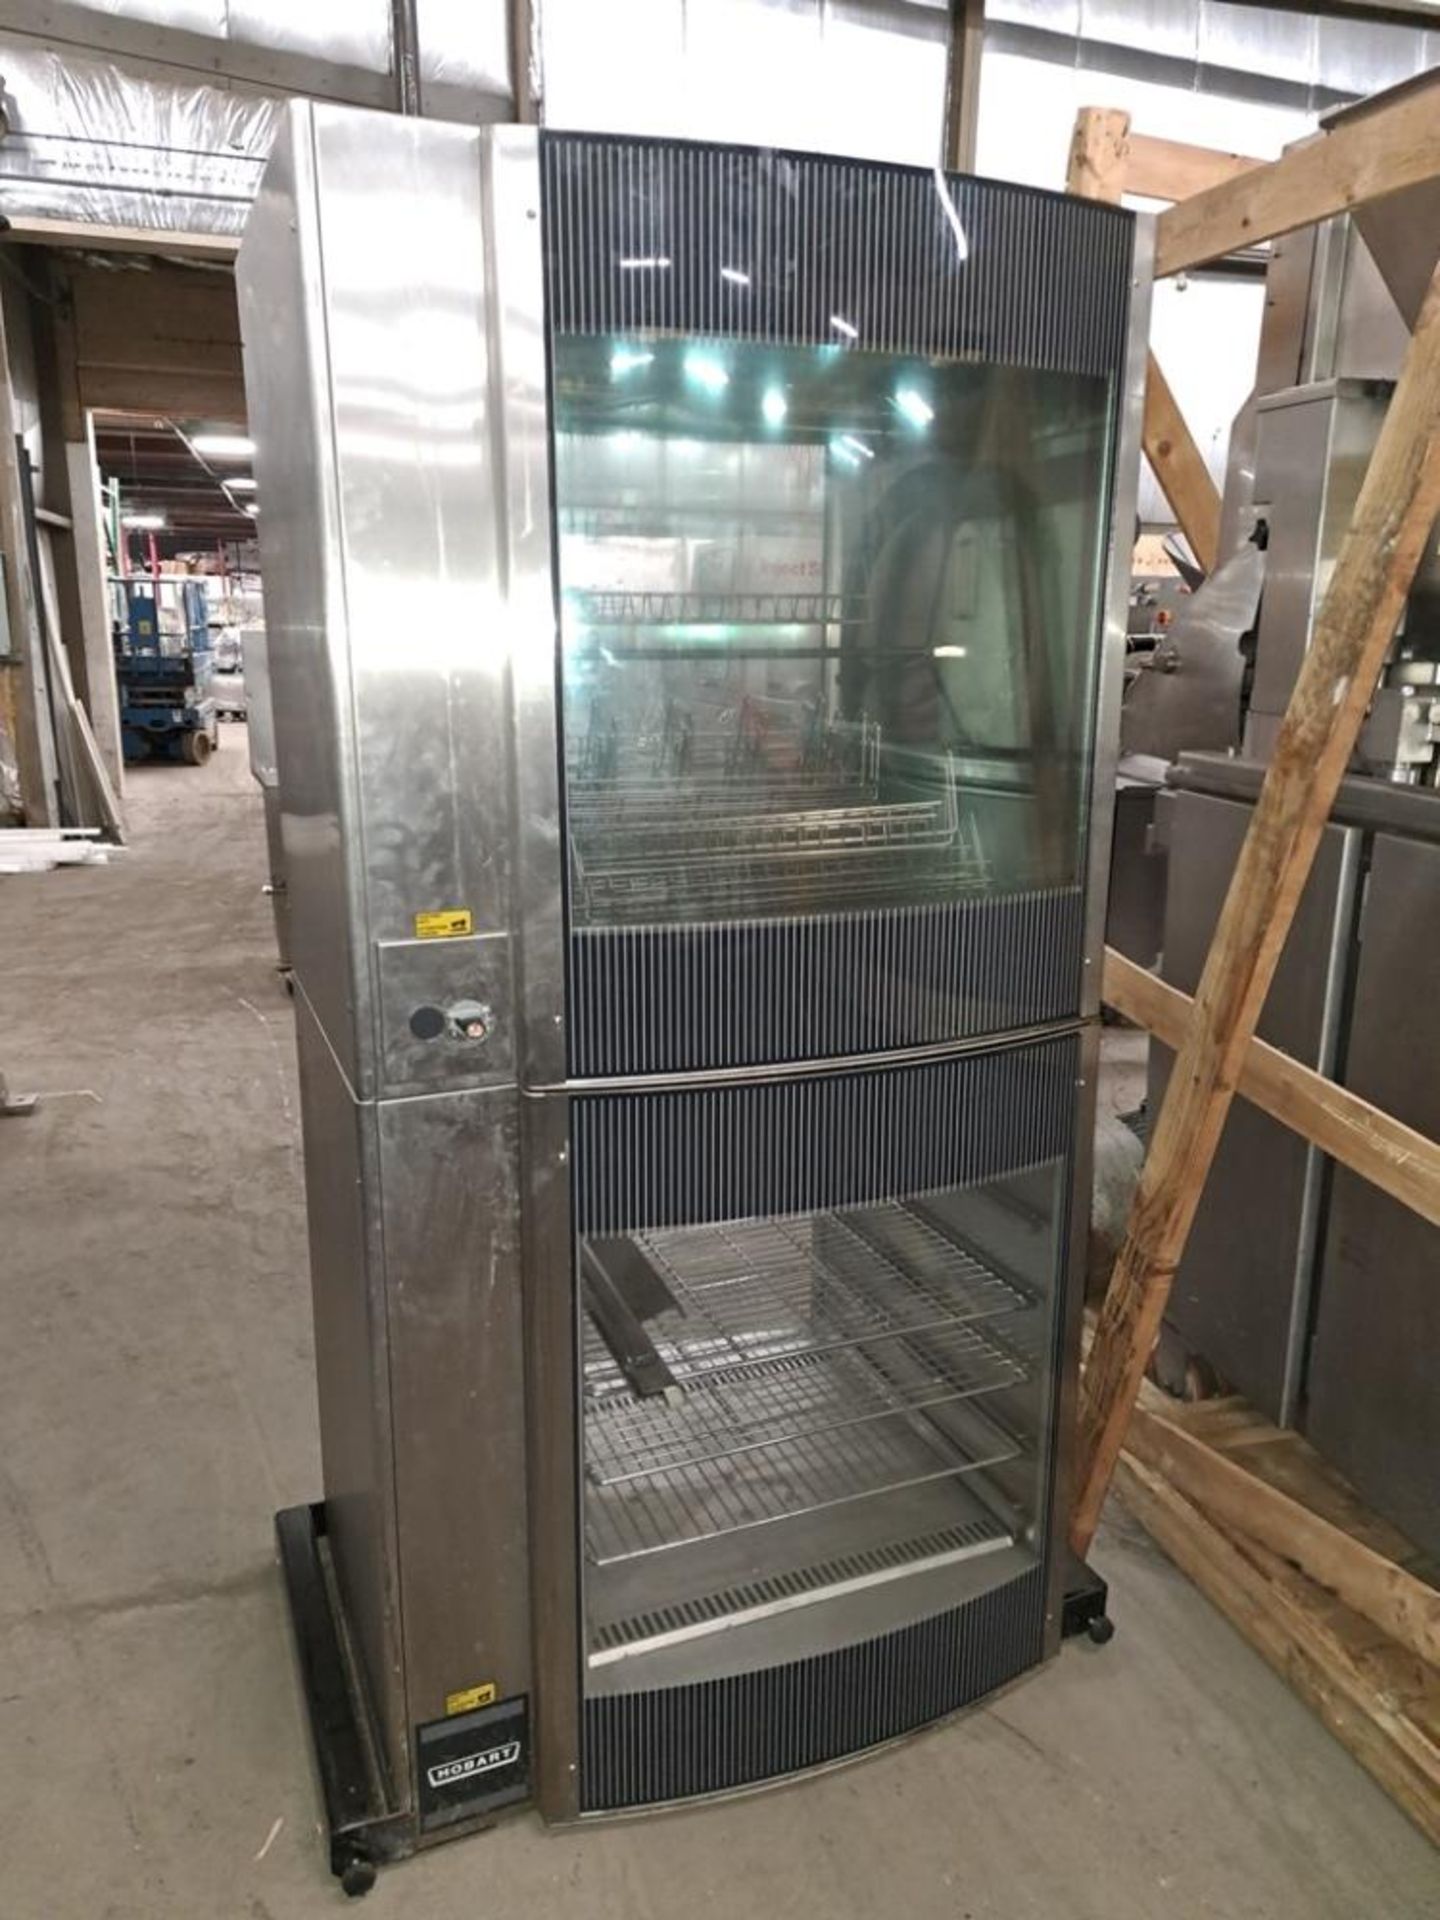 Hobart Mdl. HR7 Rotisserie Oven, Ser. #750012656, 208 volts, 1/3 phase, with storage (missing glass) - Image 3 of 6